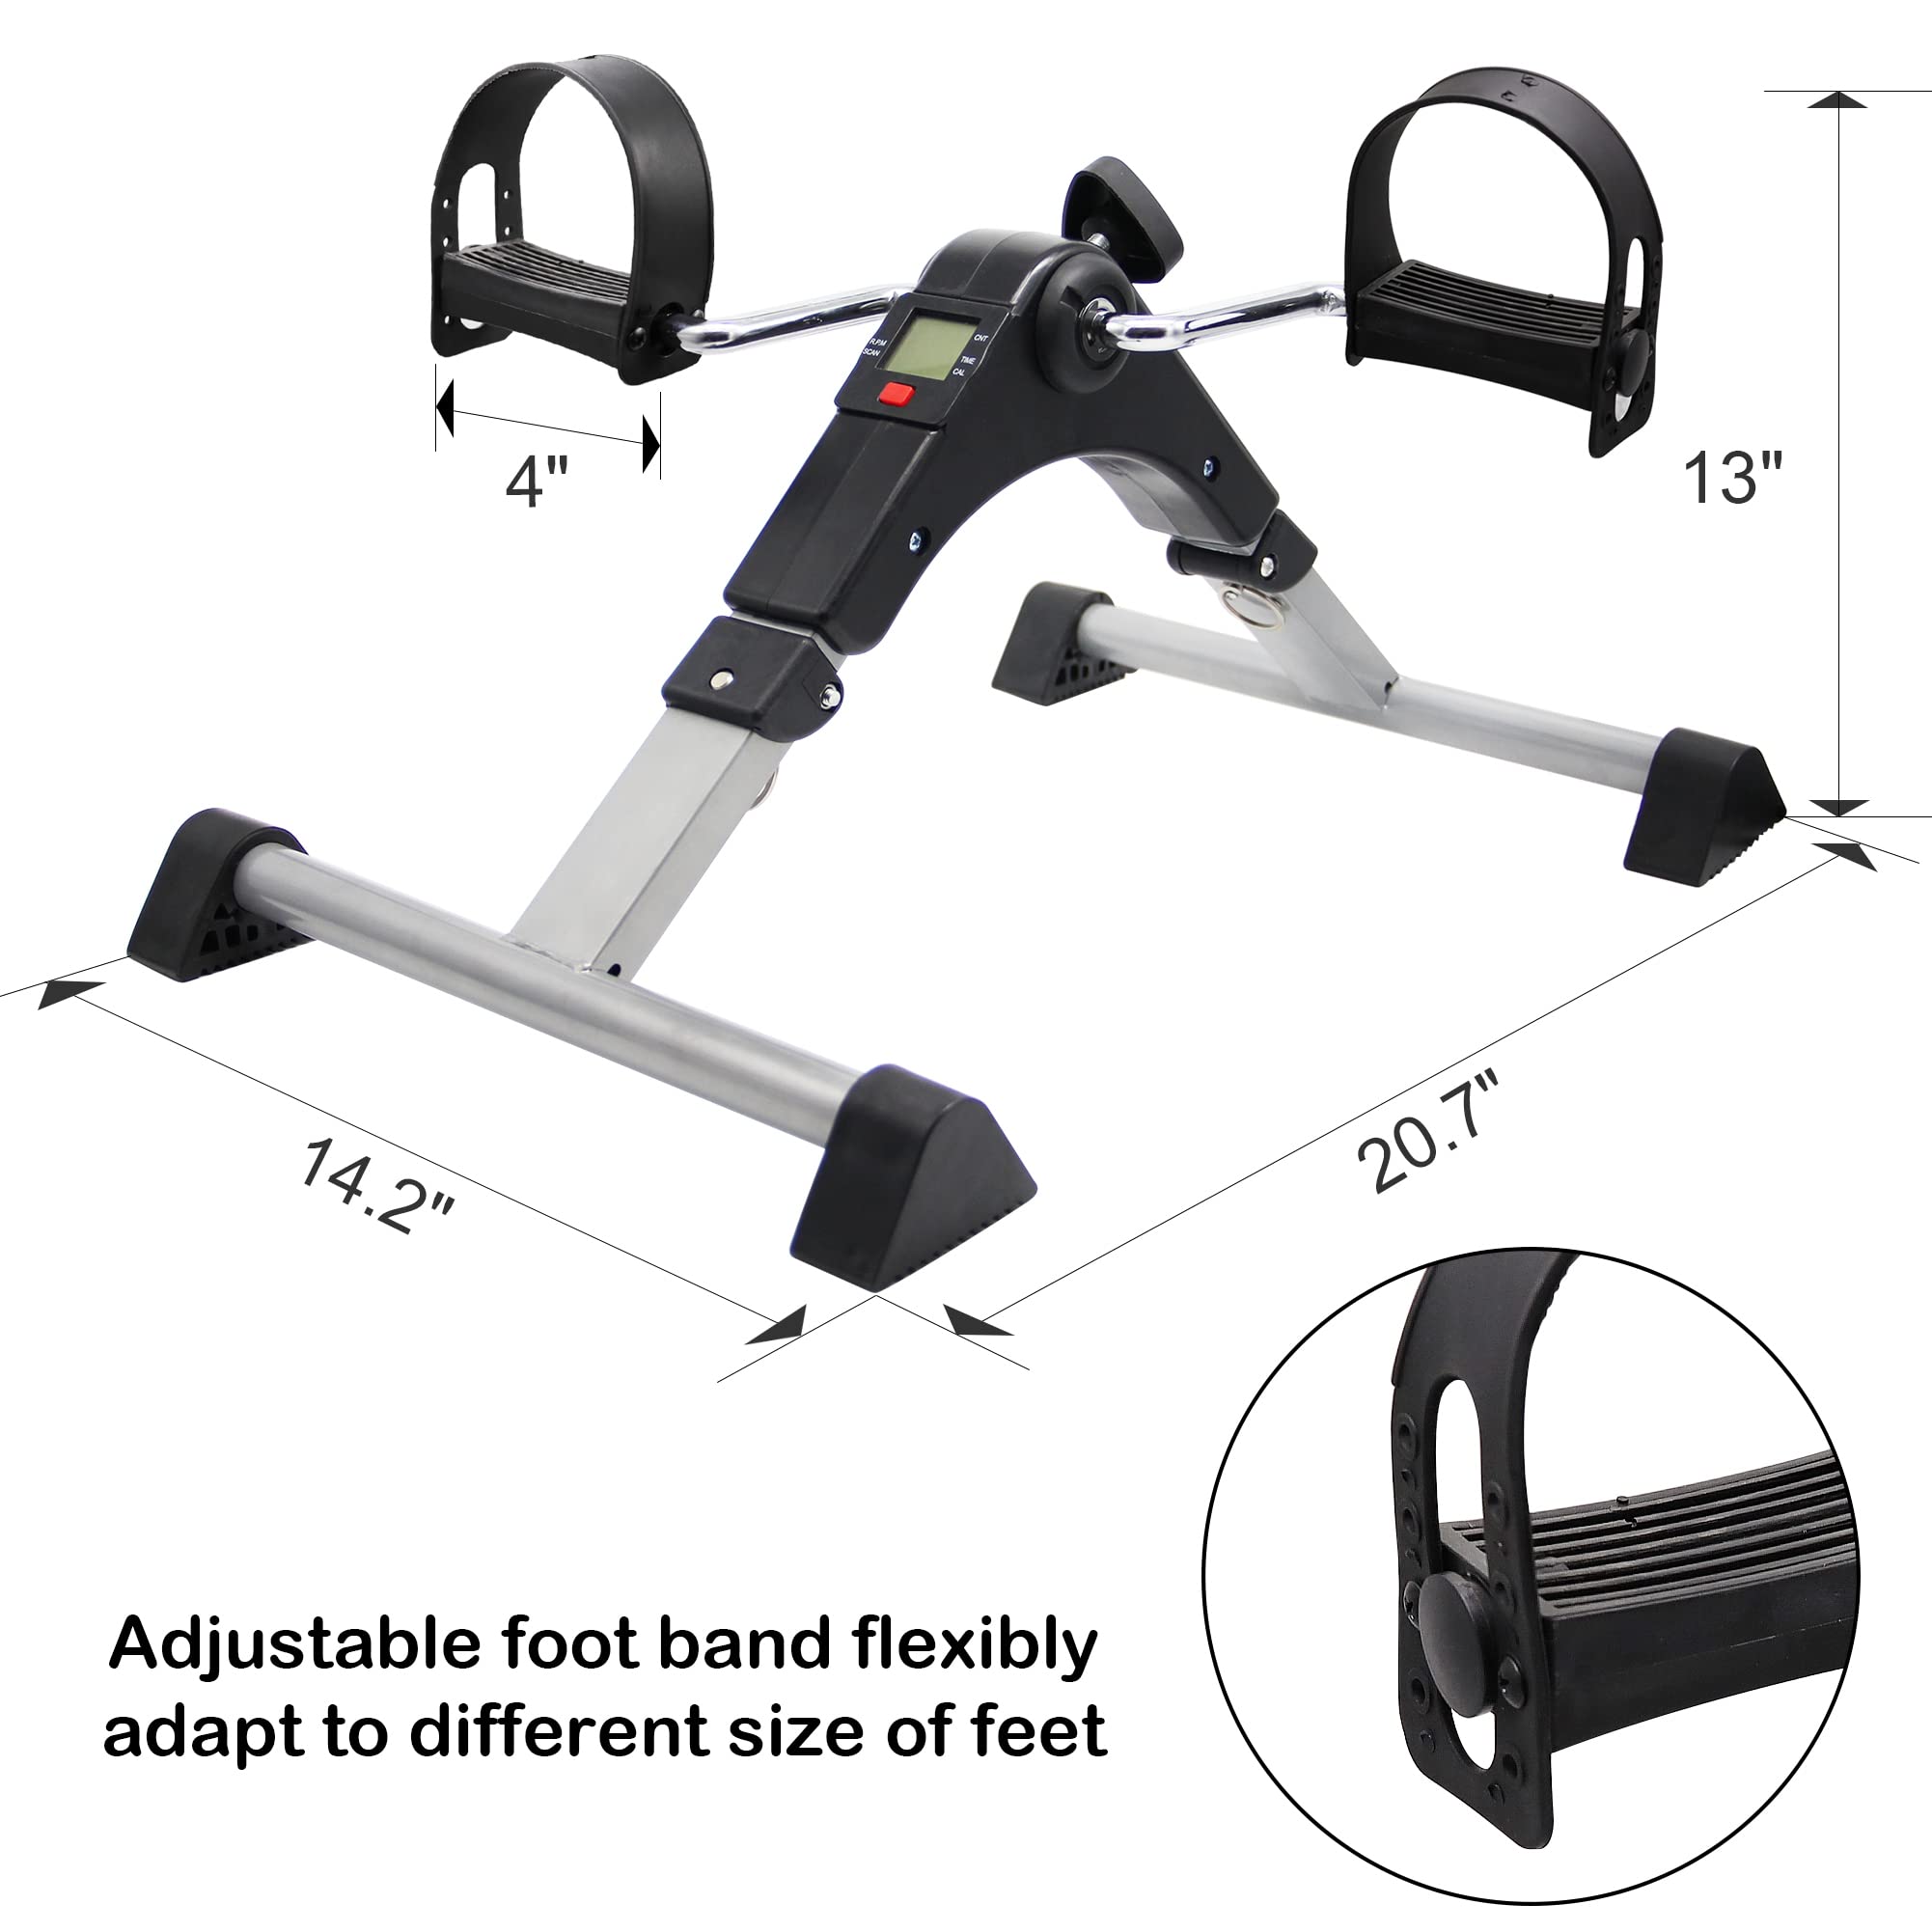 Hausse Folding Exercise Peddler Portable Pedal Exerciser with Electronic Display, Black